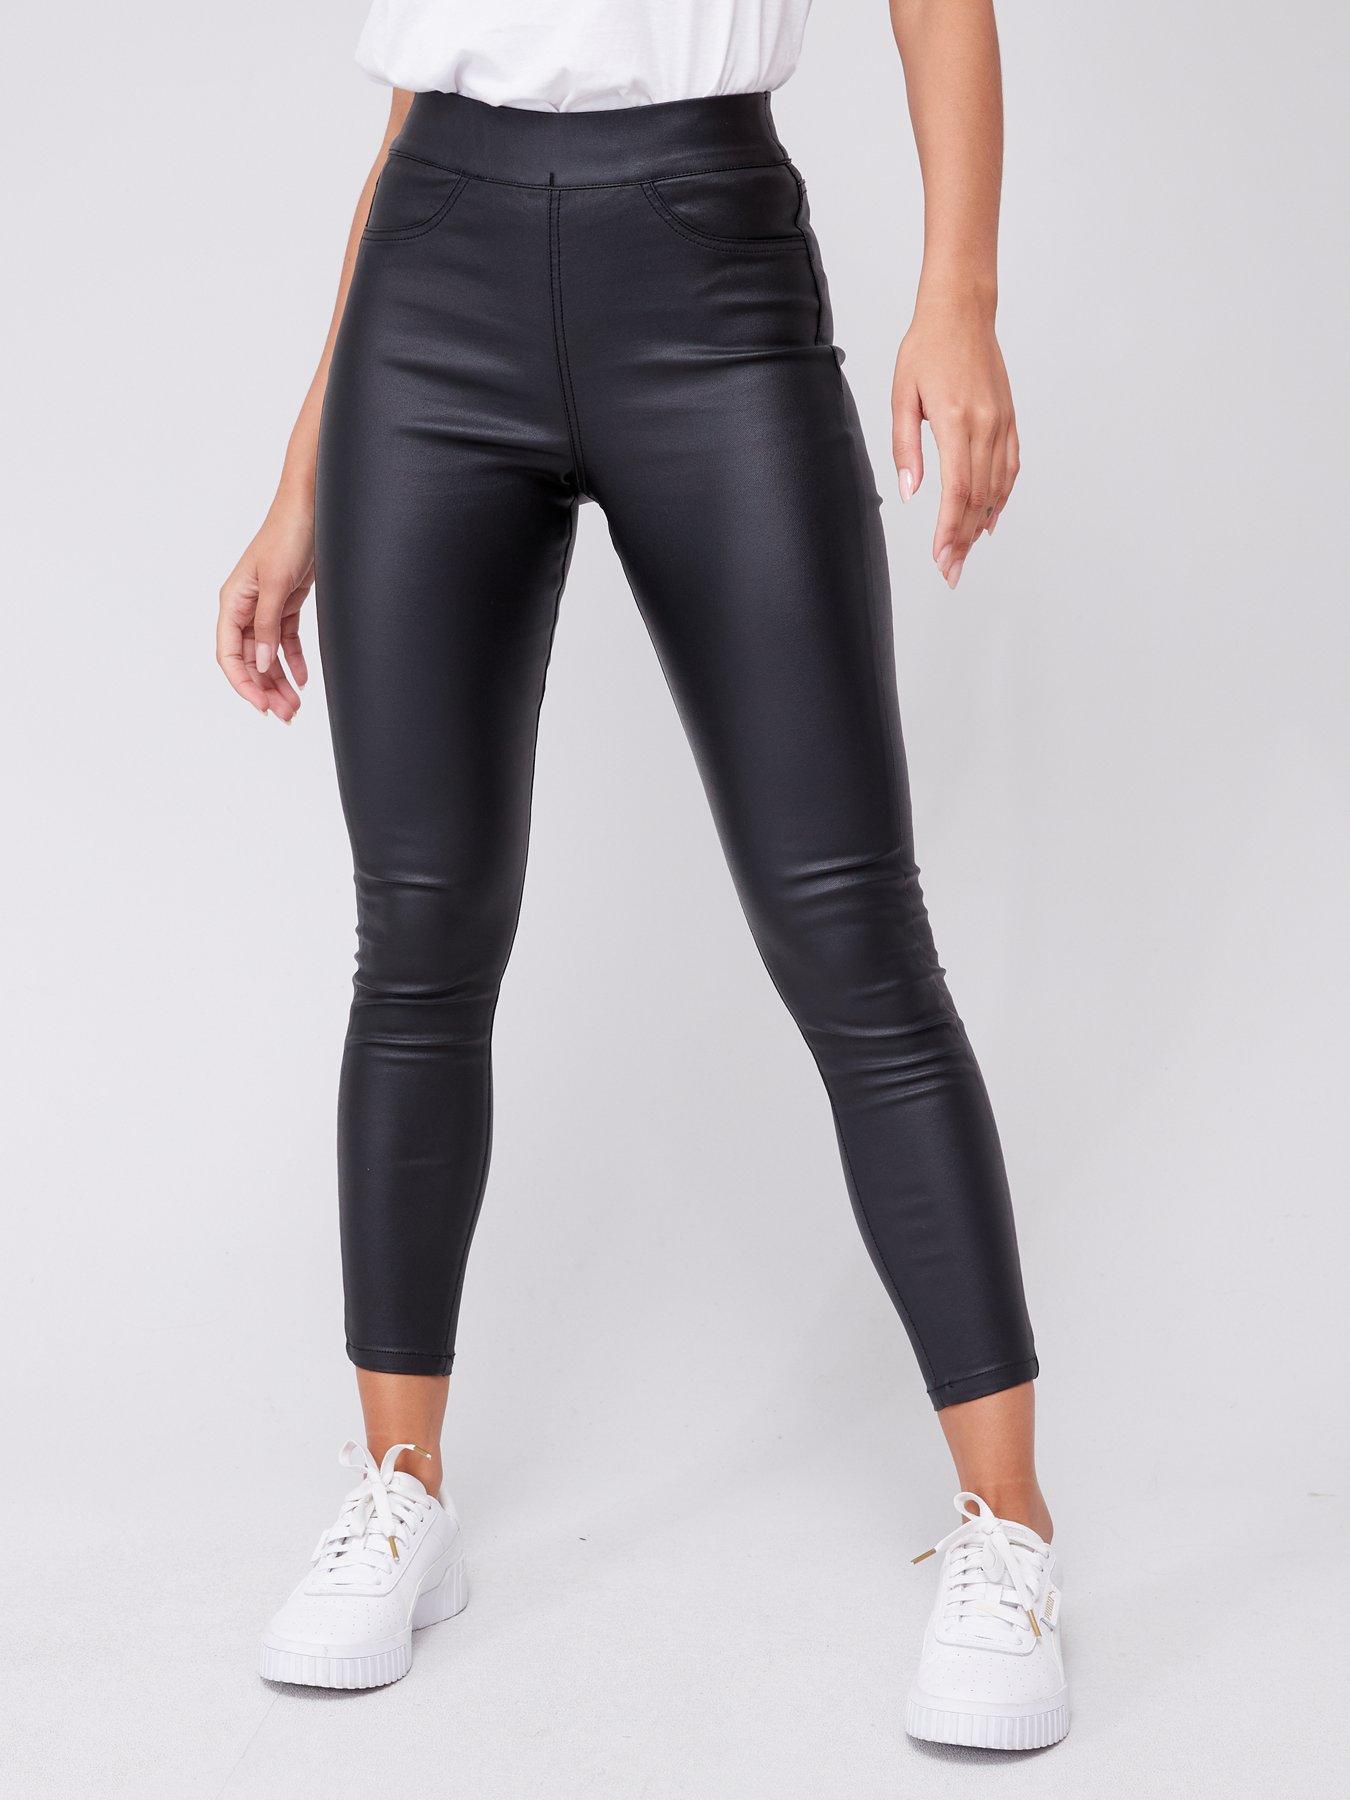 Black Coated Emilee Jeggings New Look from NEW LOOK on 21 Buttons